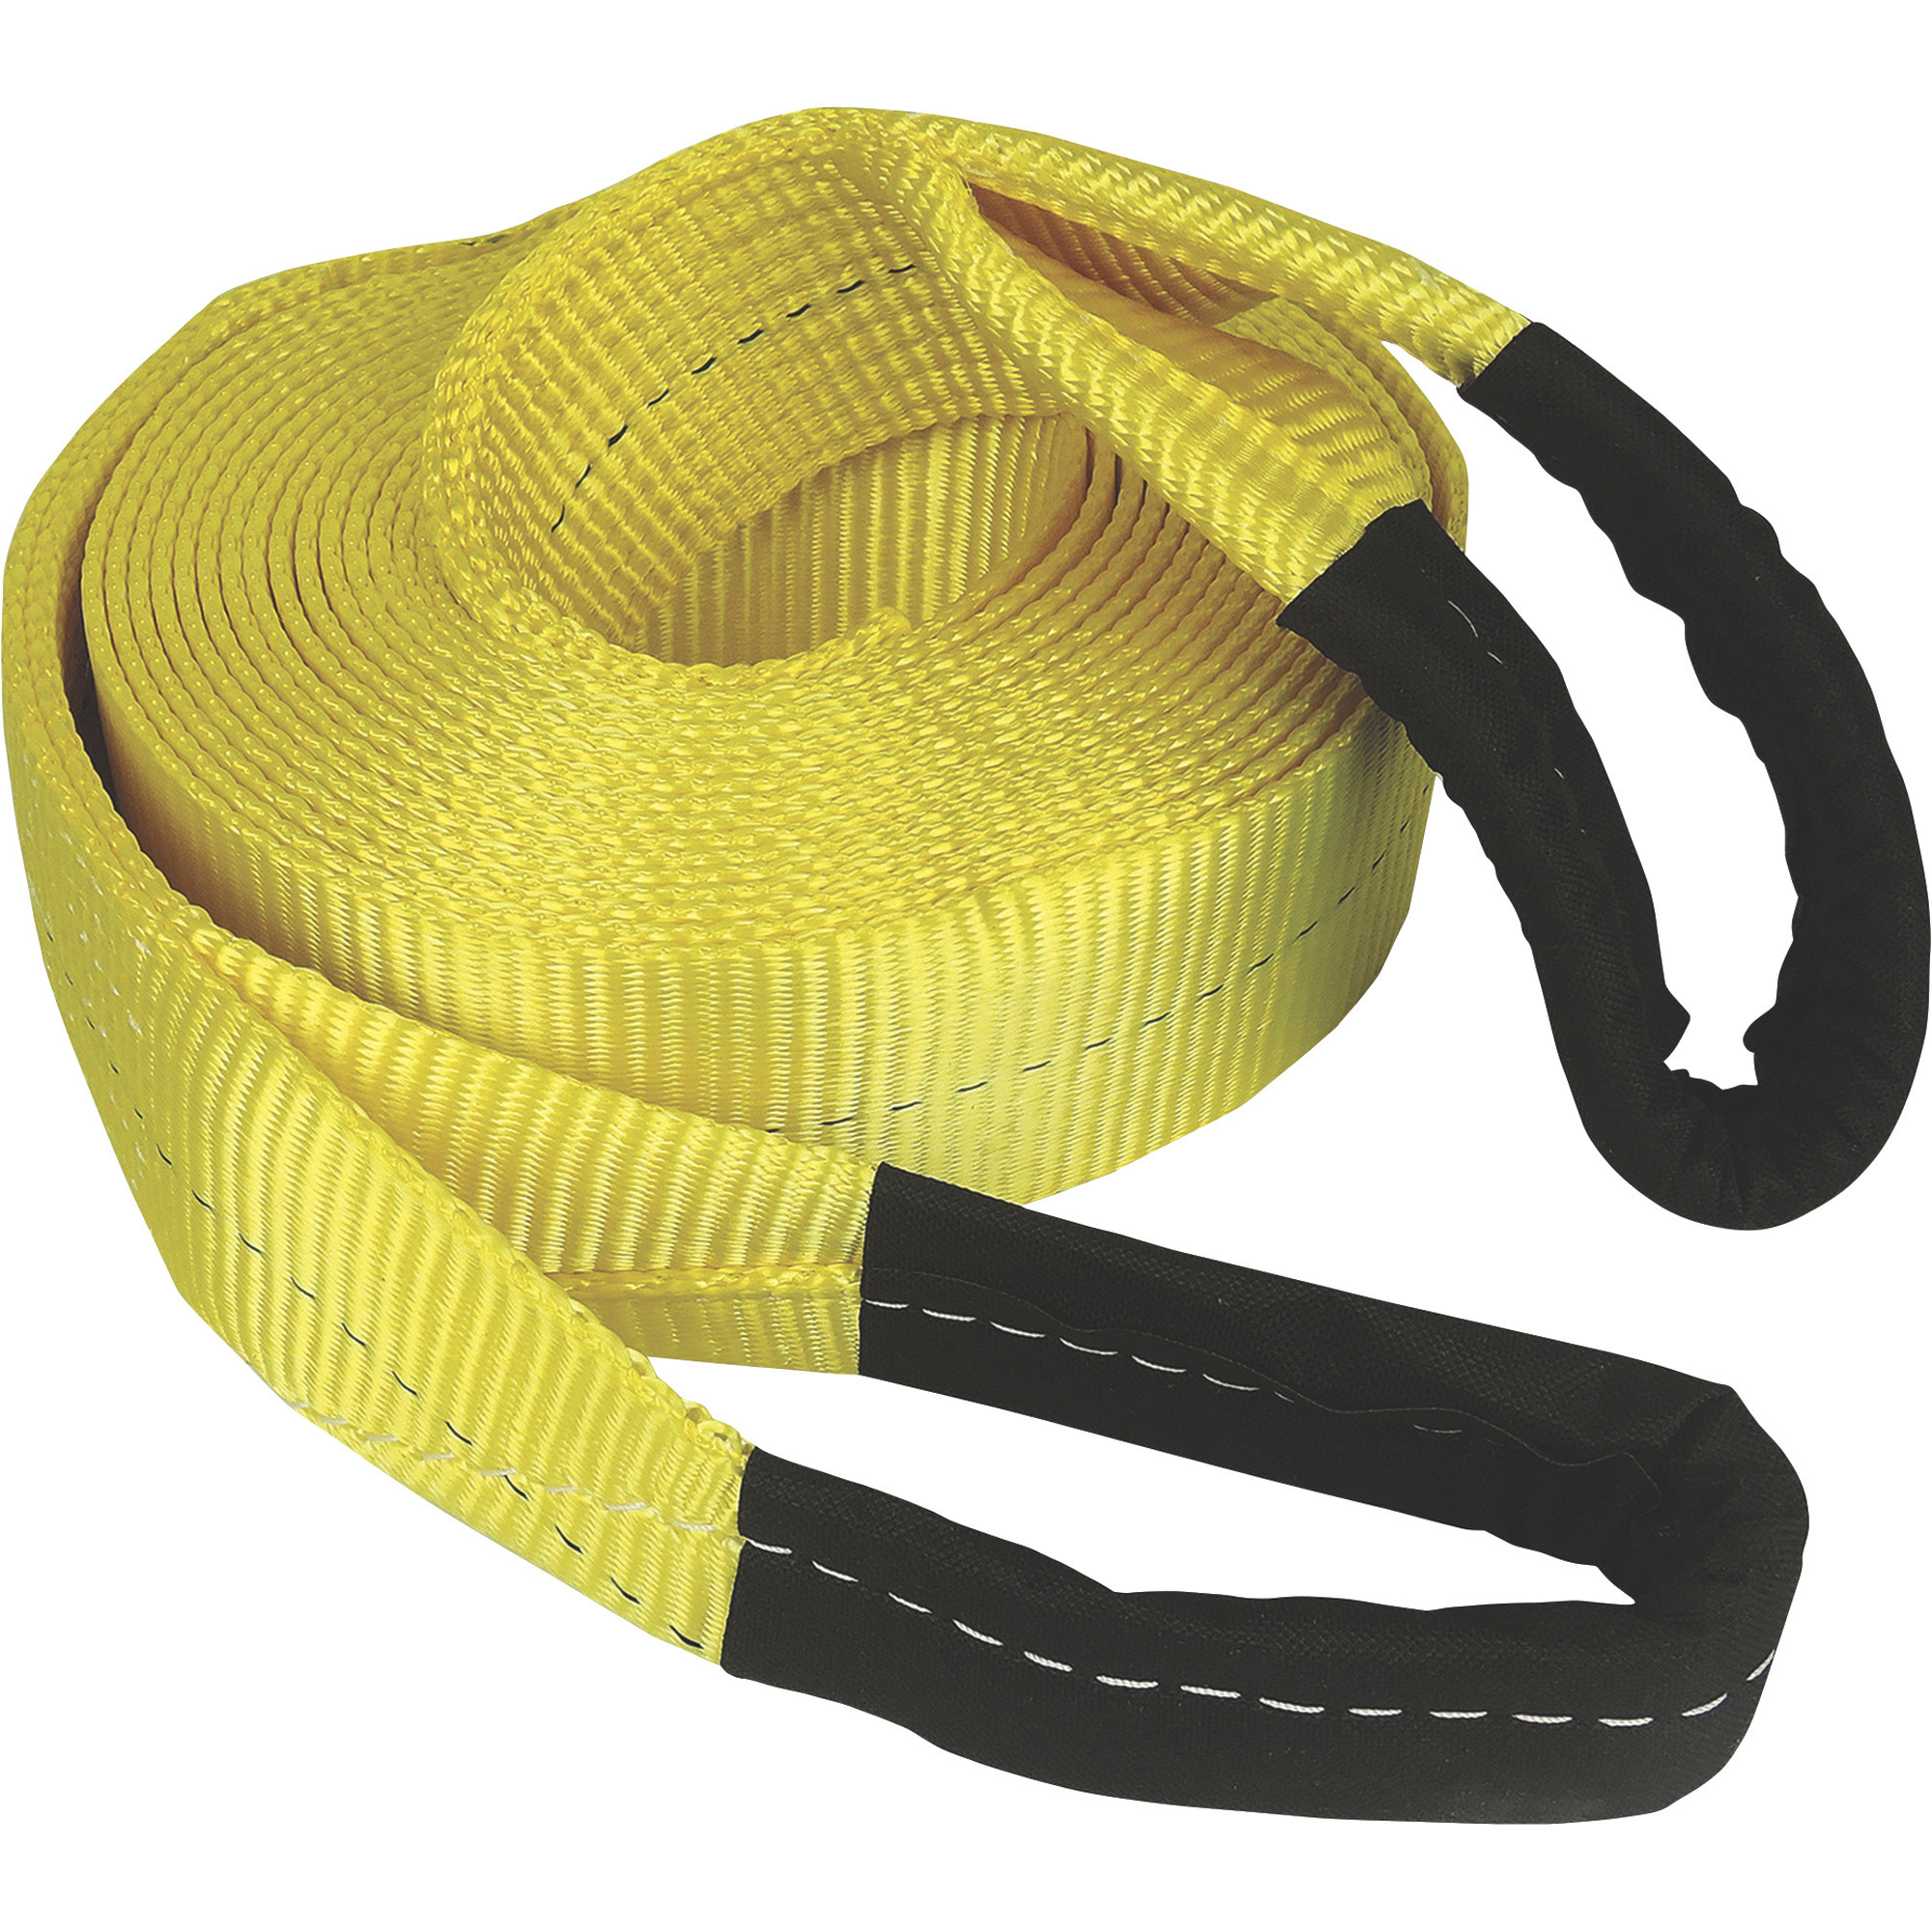 SmartStraps Heavy-Duty Recovery Tow Strap with Loop Ends, 30ft.L x 3Inch W, 7,500-Lb. Working Load, 22,500-Lb. Breaking Strength, Yellow, Model 832